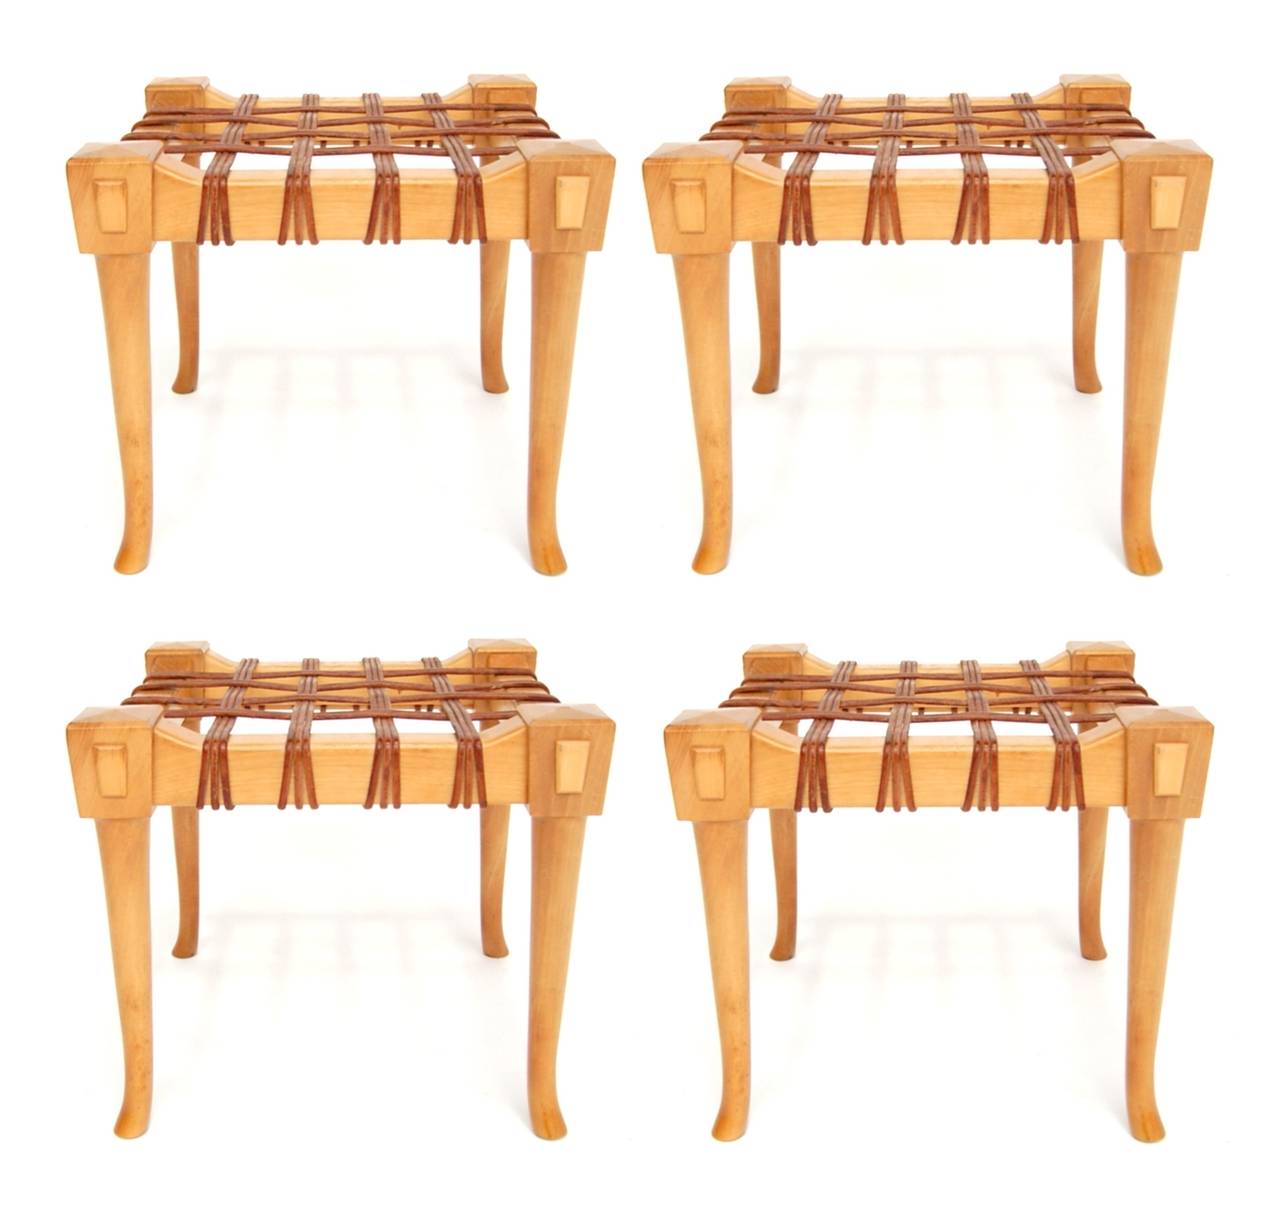 Four Klismos style stools in bleached walnut with leather cord. Stools are stackable.

We offer free delivery on most of our items within the Long Island or greater NYC, Northern New Jersey, Connecticut and Massachusetts areas. Please inquire for